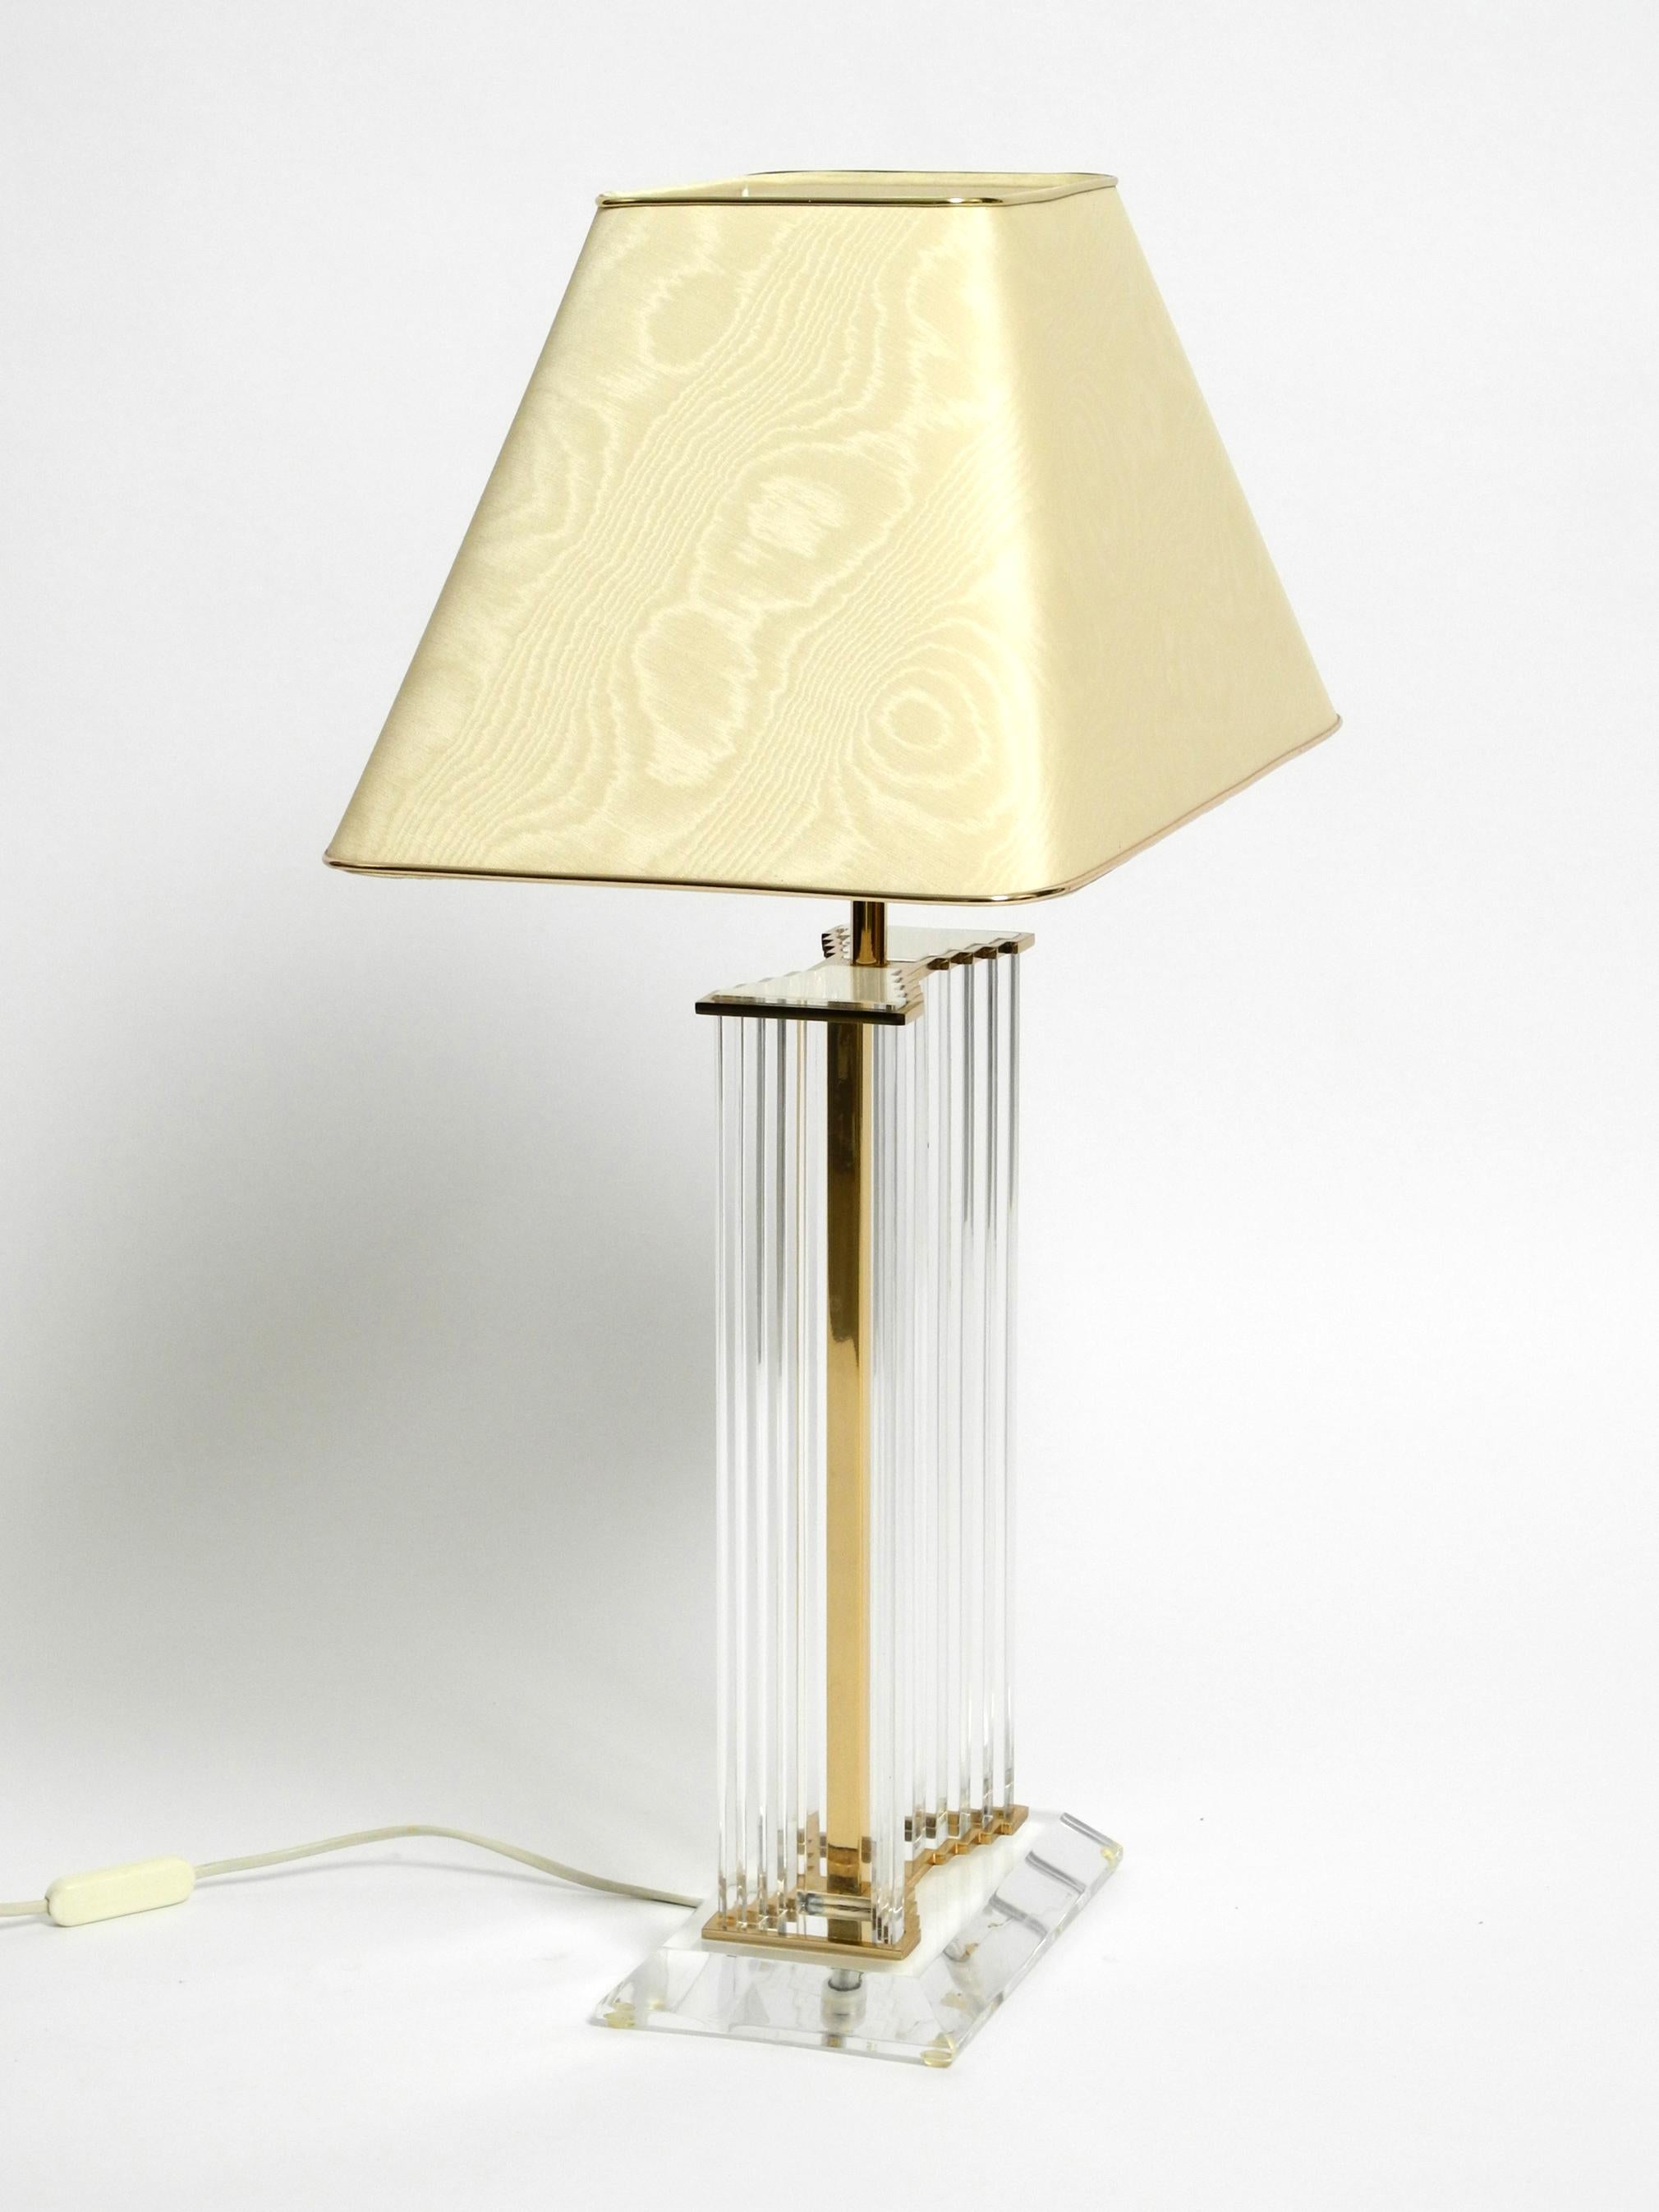 Very Rare Elegant Large Plexiglass Table Lamp from the 1970s with Silk Shade In Good Condition For Sale In München, DE